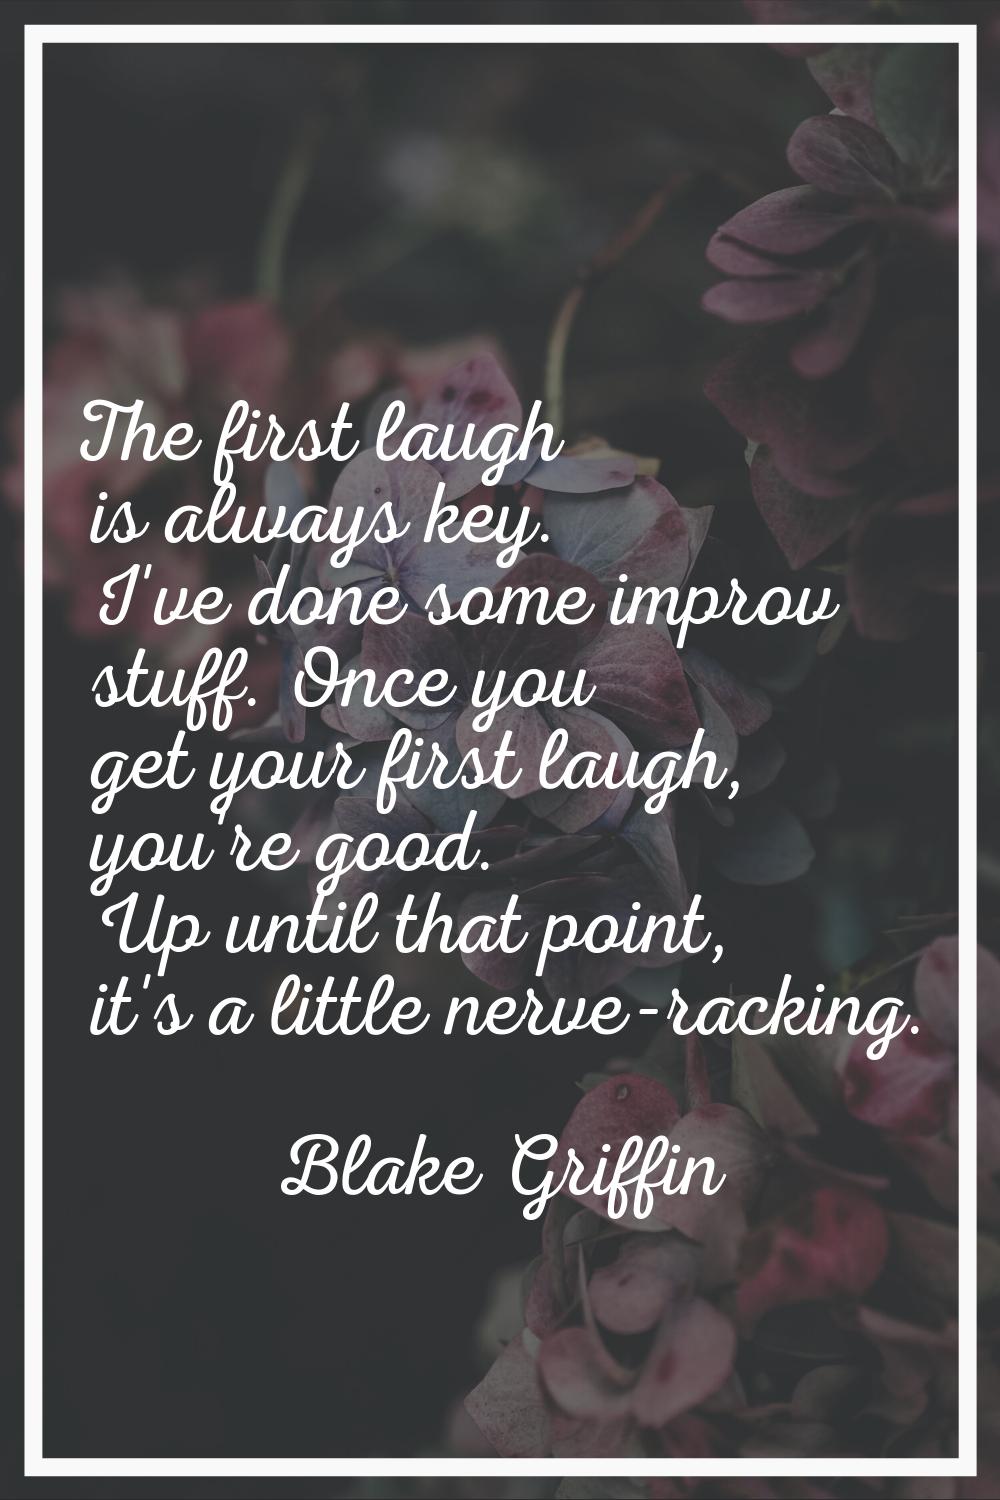 The first laugh is always key. I've done some improv stuff. Once you get your first laugh, you're g